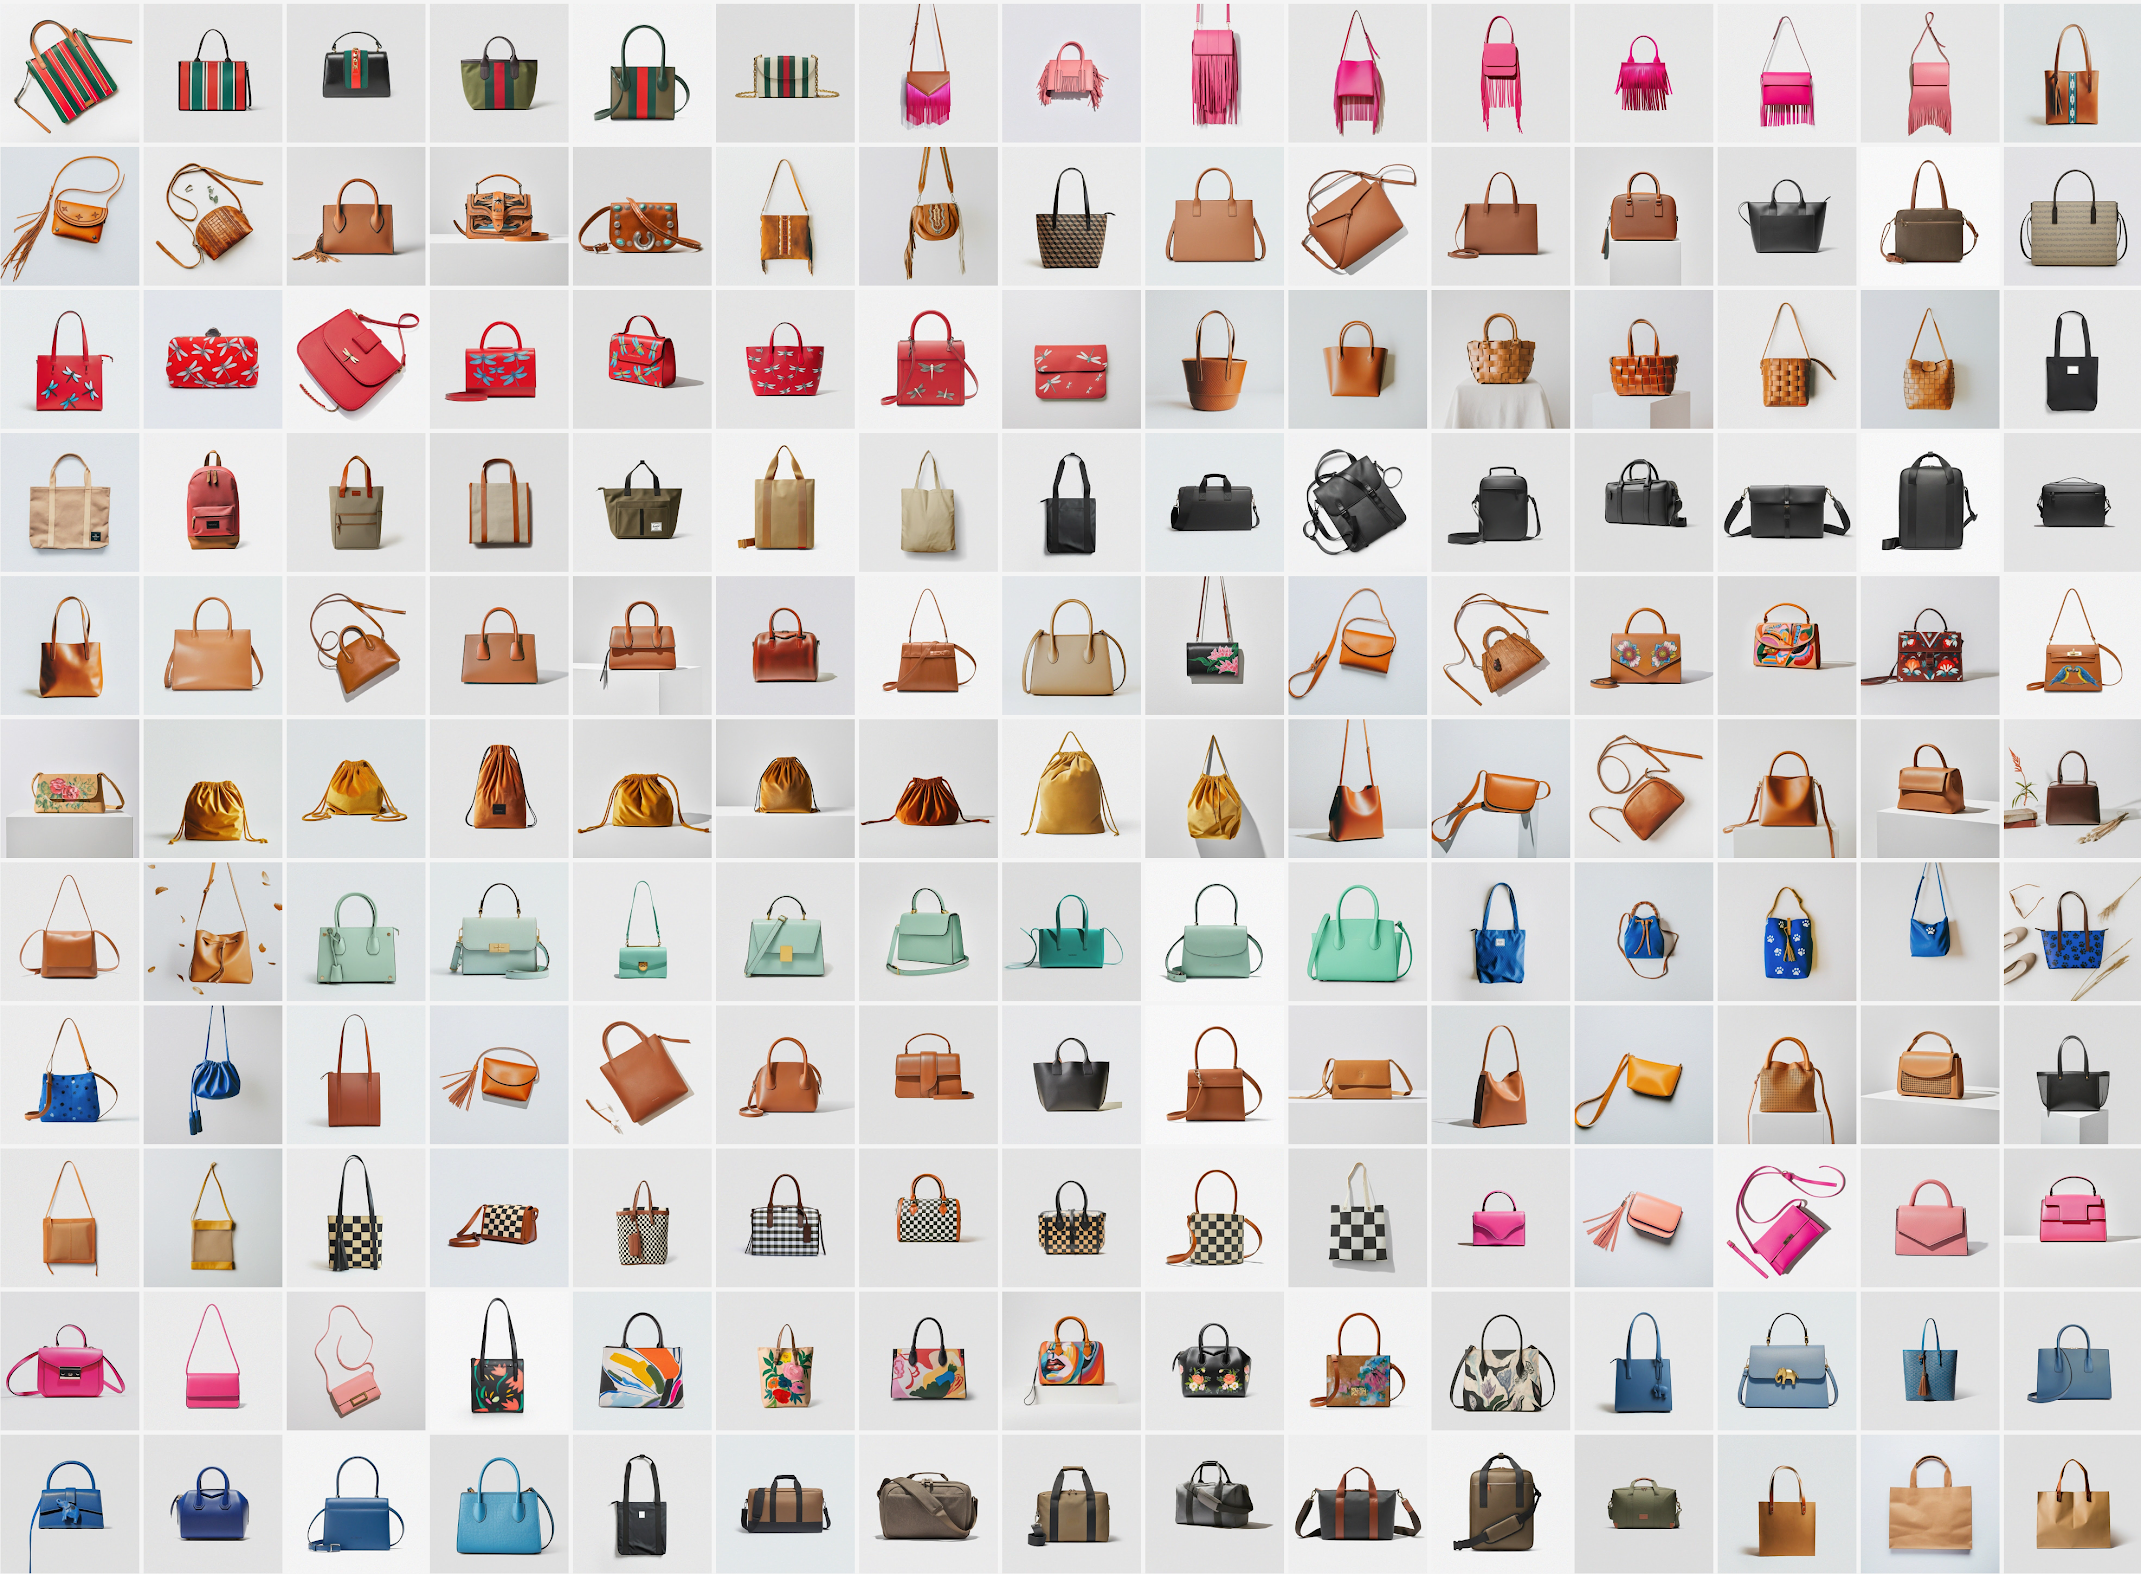 A 15 x 11 grid shows 165 AI-generated handbags based on user prompts.